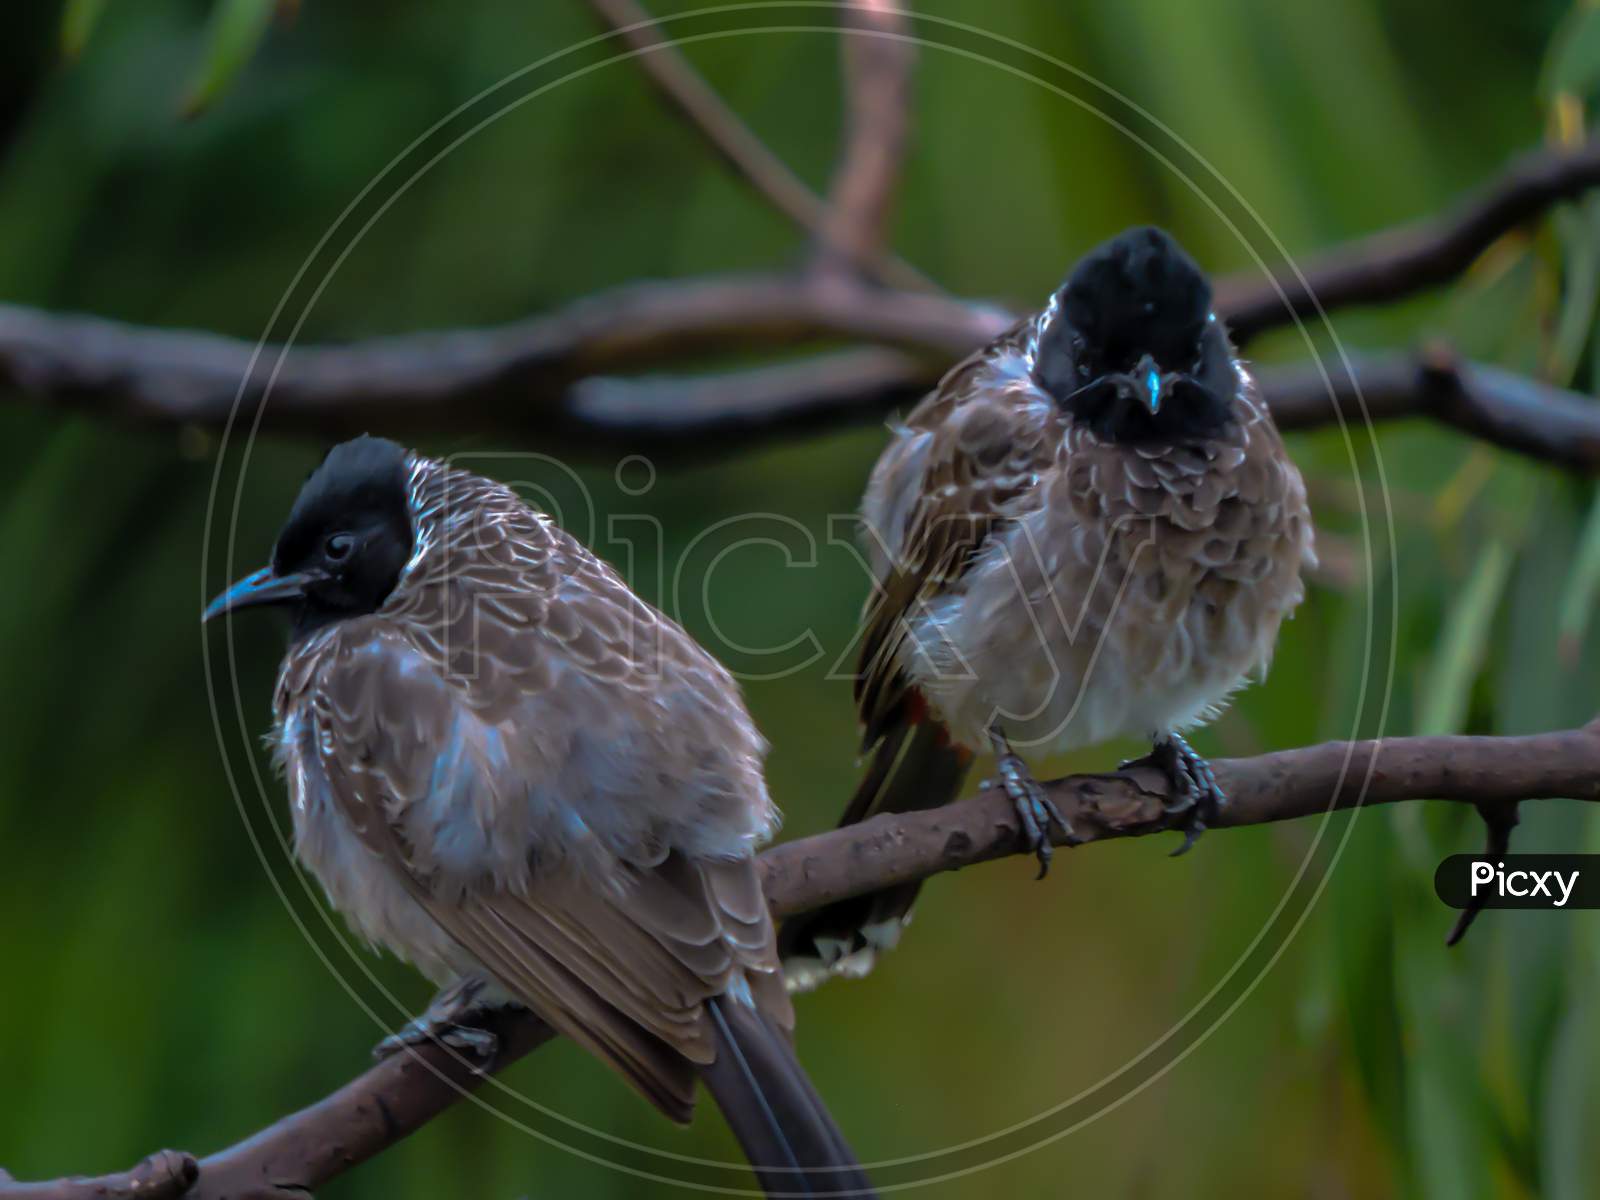 Red Vented Bulbul in Asia during Monsoon on Trees